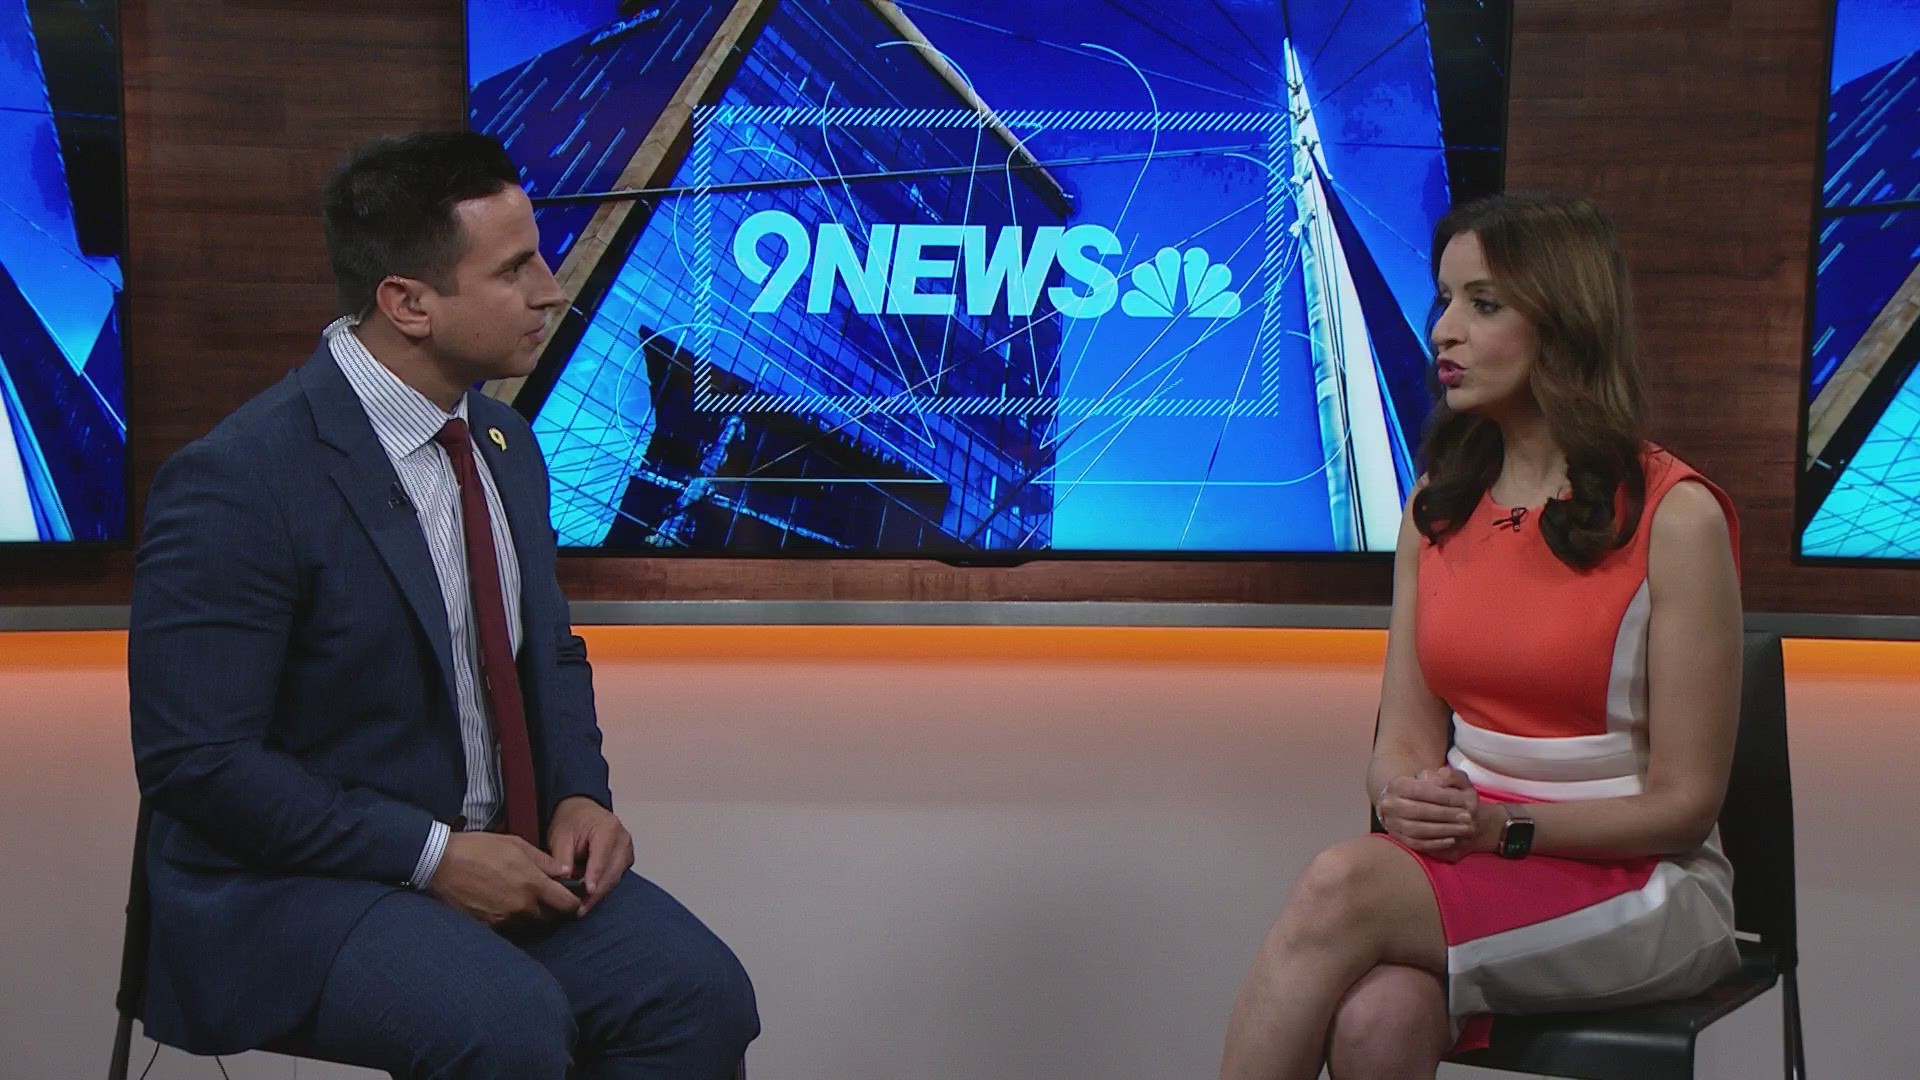 Health expert Dr. Payal Kohli discusses a new study suggesting certain NSAIDs can increase the risk for heart failure in people with diabetes.